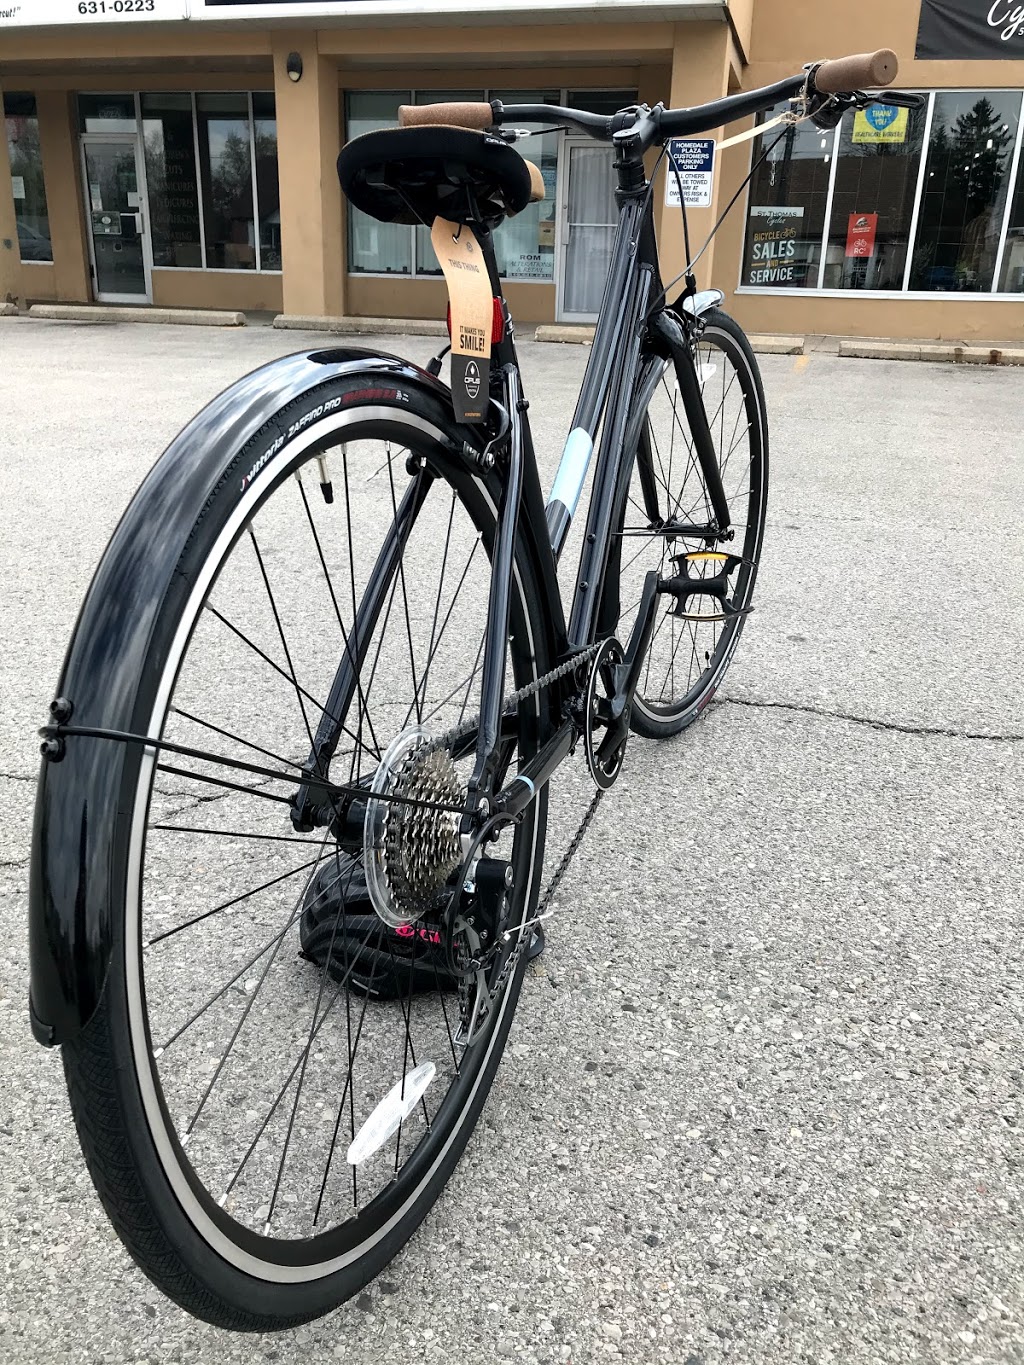 St. Thomas Cycles | 154 Fifth Ave #1, St Thomas, ON N5R 4E7, Canada | Phone: (519) 207-8600